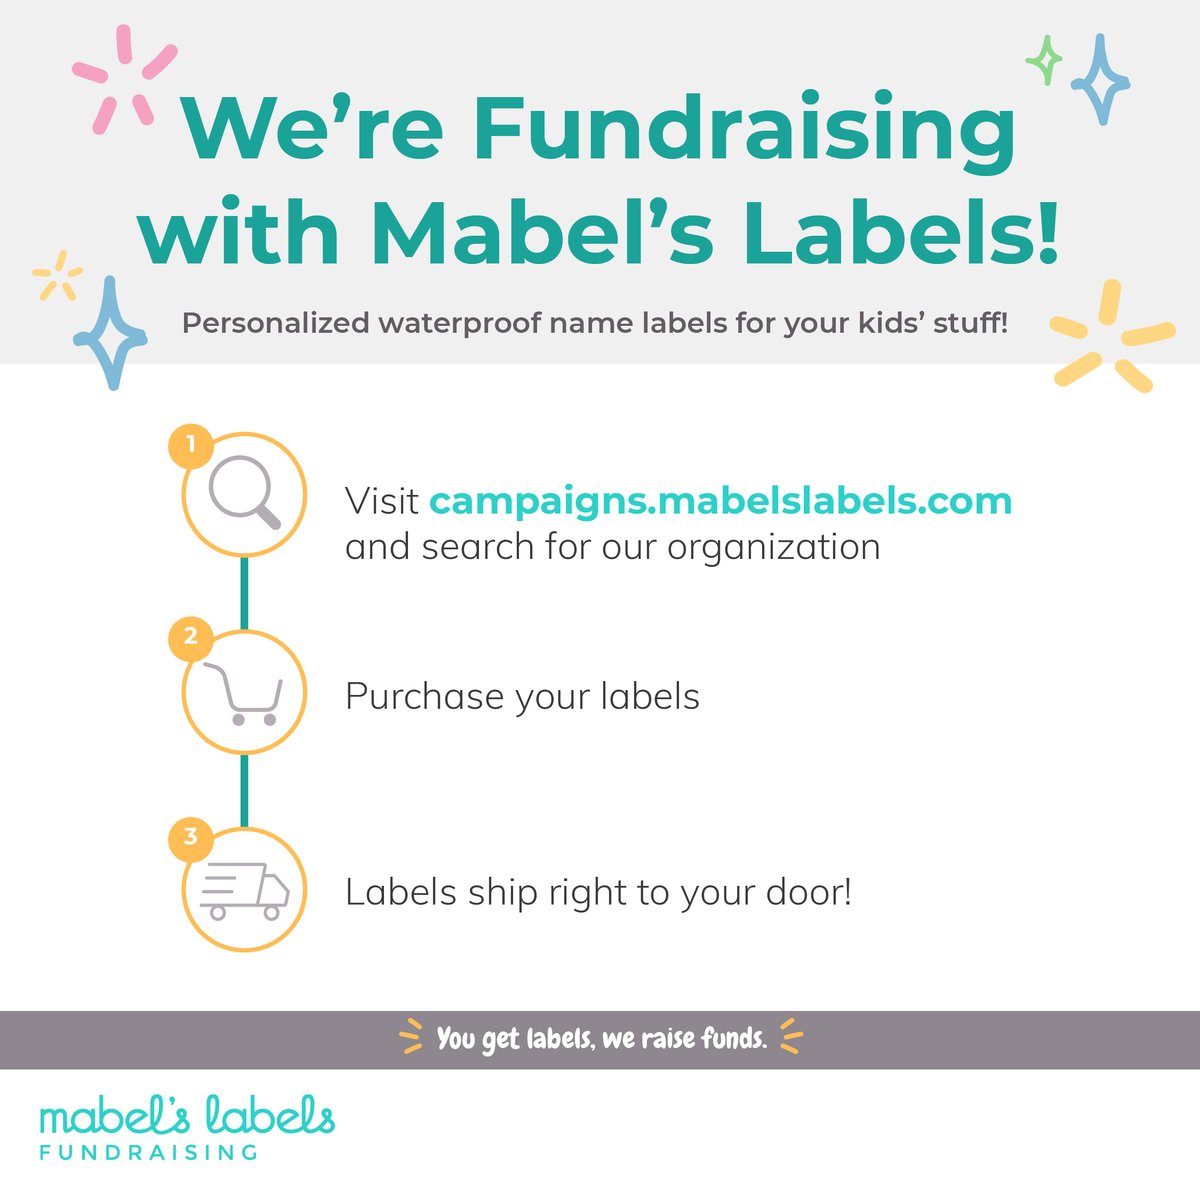 😎 Ordering labels for Summer camp? Shop at campaigns.mabelslabels.com and search for PS10 PTA (Brooklyn). 20% of your purchase price will come directly back to our school! 😎